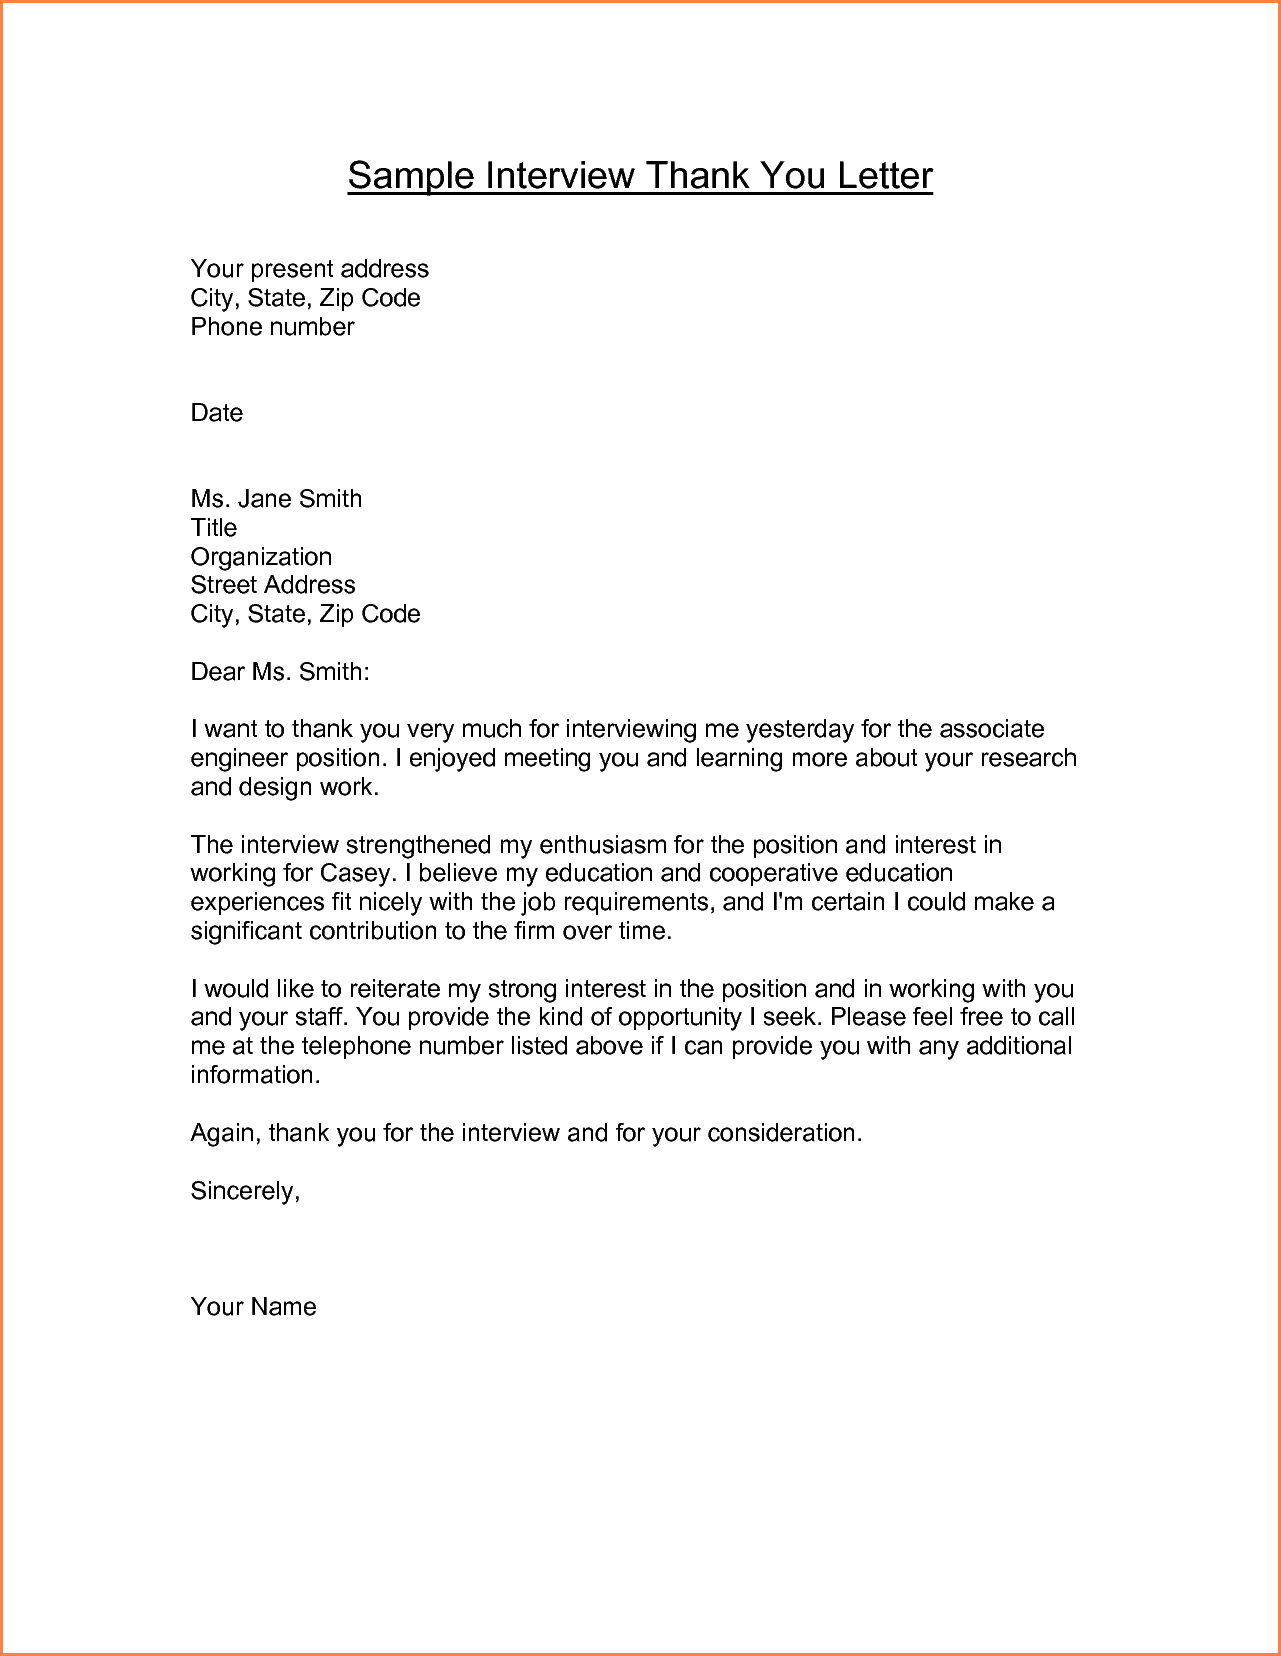 Thank You Letter For Phone Interview Sample from legaldbol.com